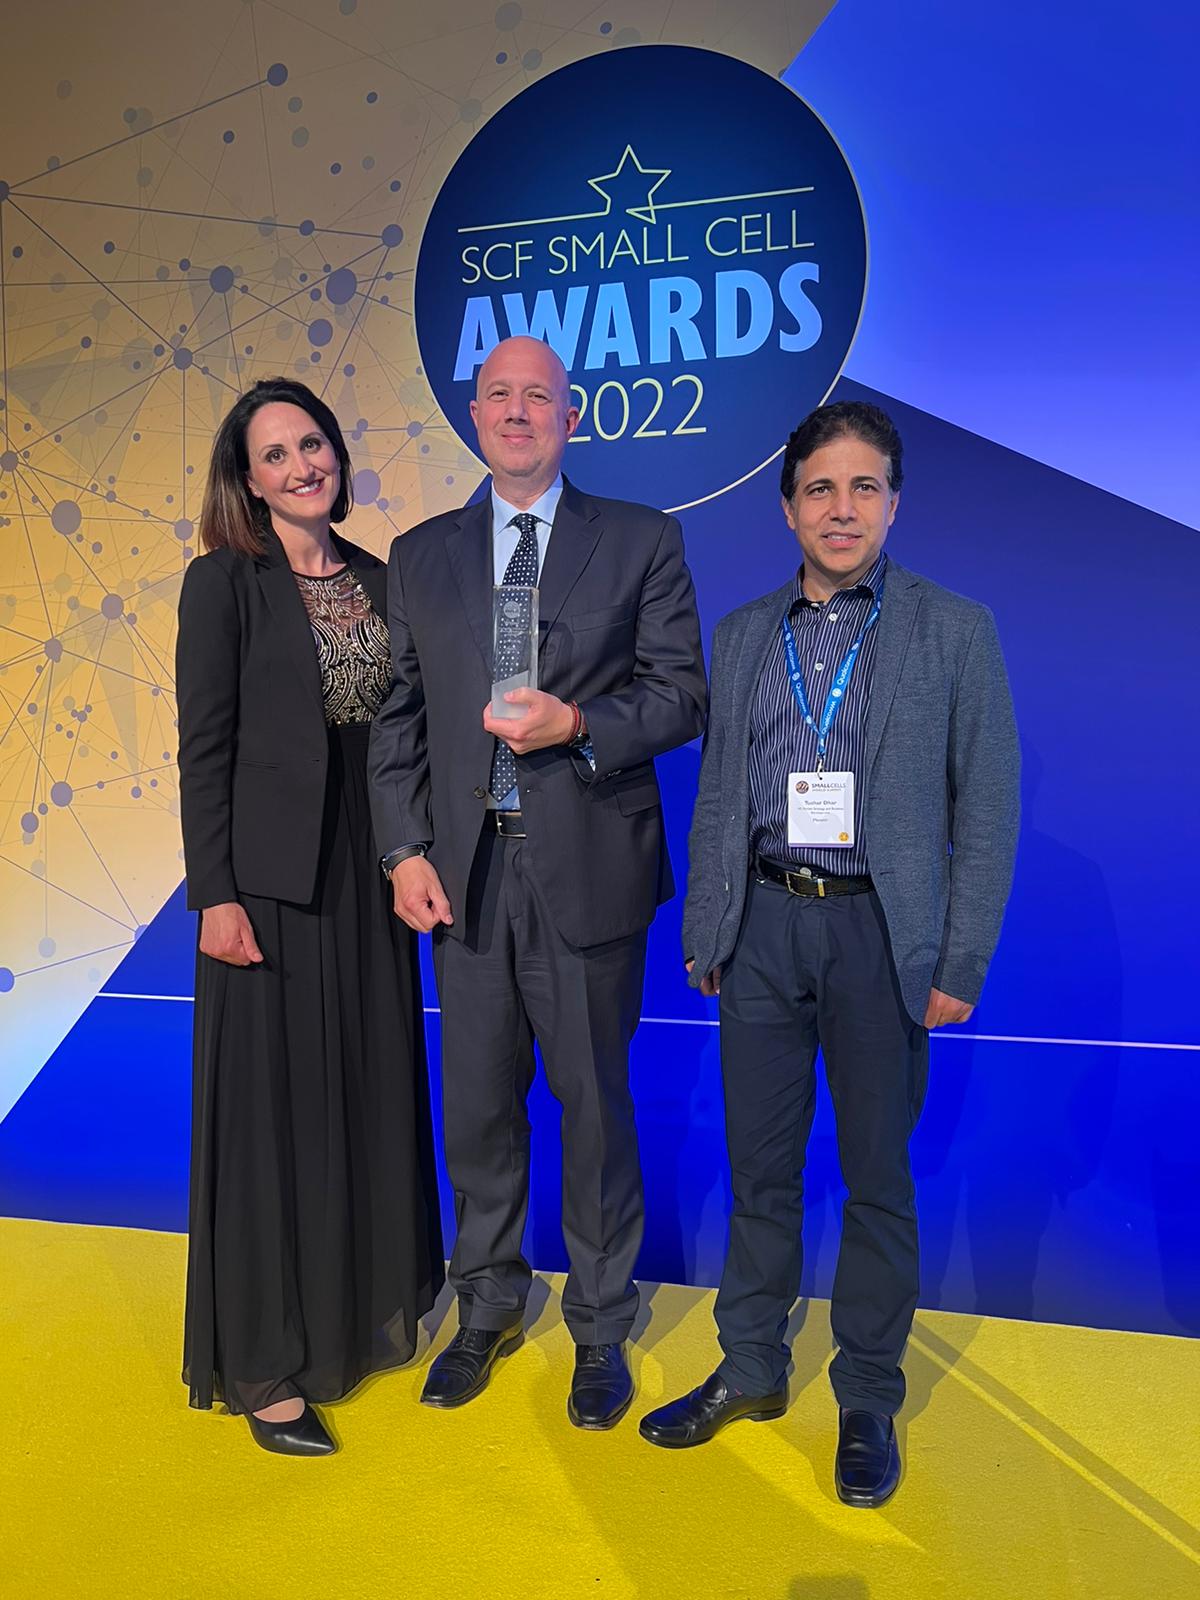 SCF Small Cells Awards 2022 for Outstanding Contribution to Emerging Technology or Architecture. From right to left: Emmanuela Spiteri, Director of Global PR; Stefano Cantarelli, CMO; Tushar Dhar, VP Market Strategy & Business Development.